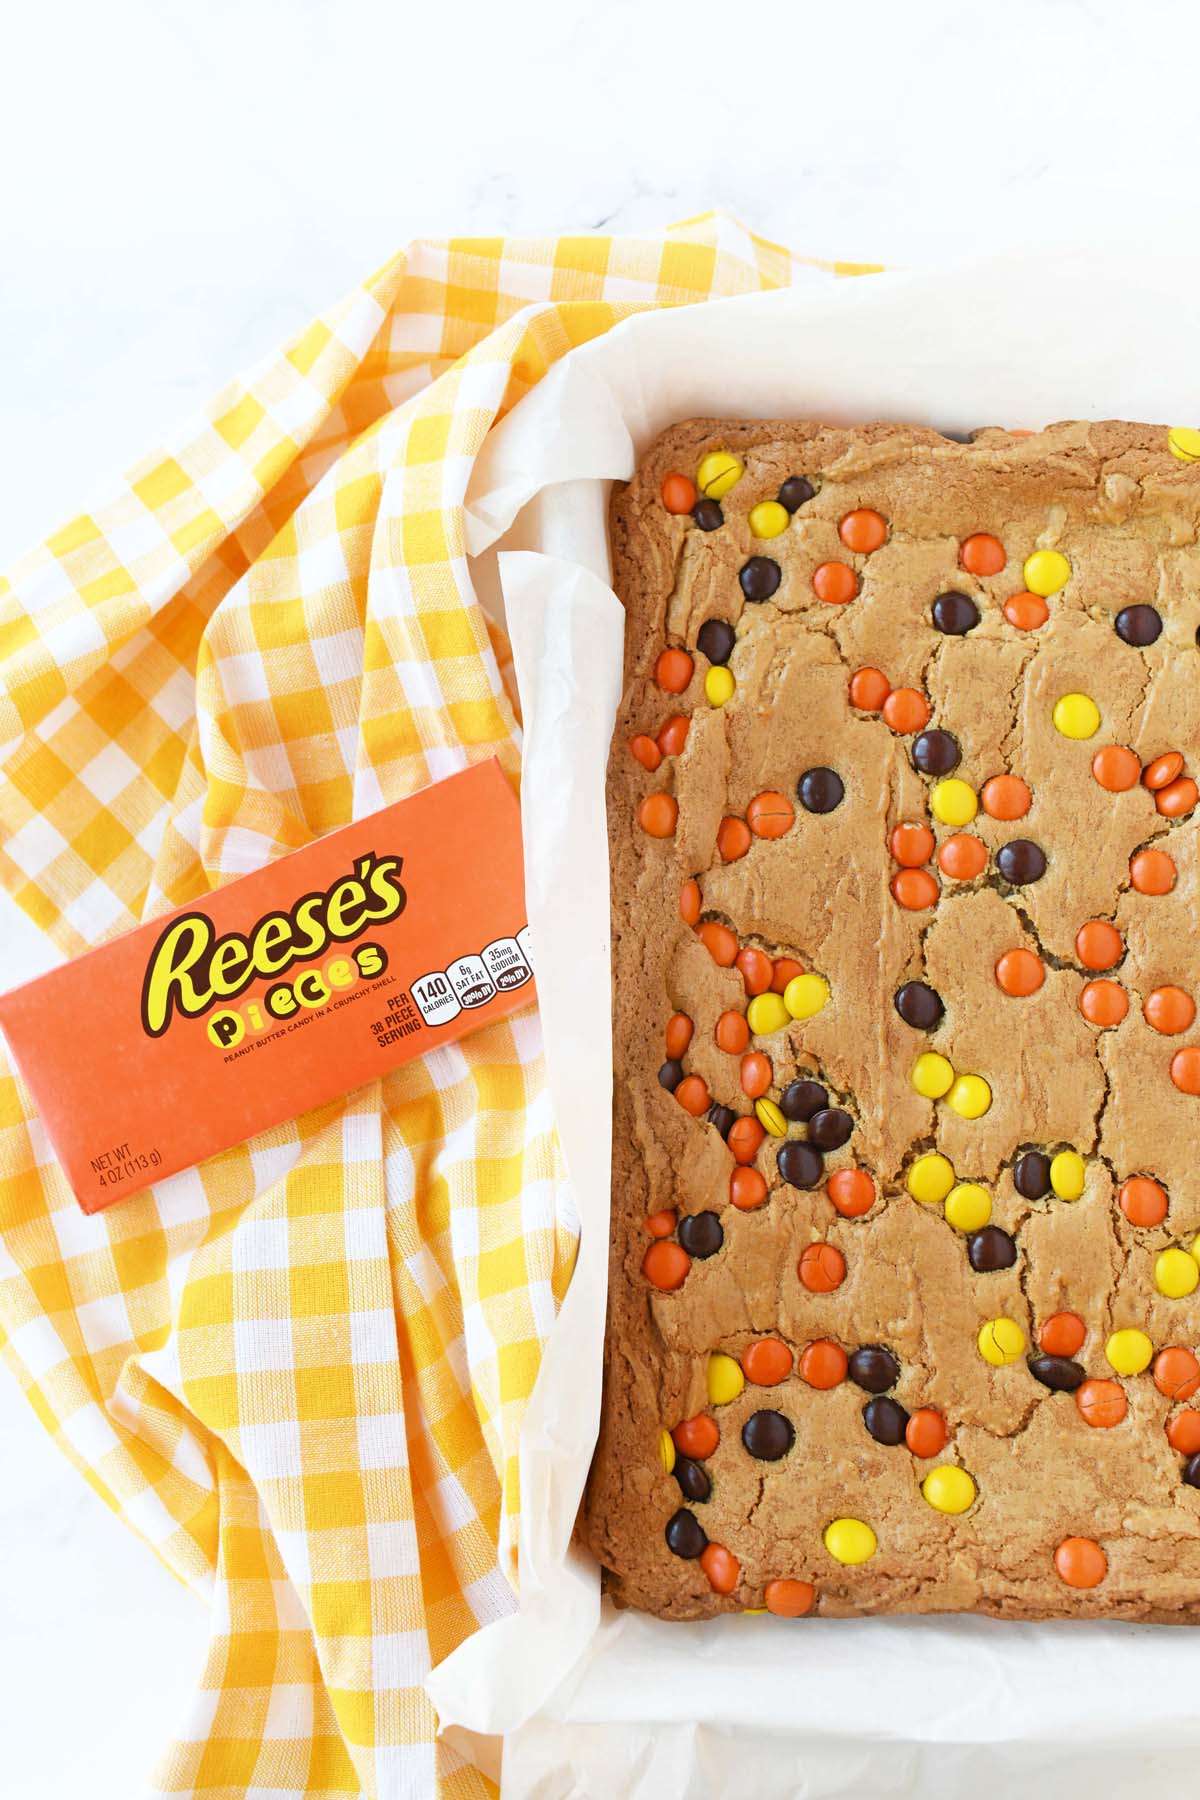 Reese's Pieces brownies near a yellow napkin and candy box.